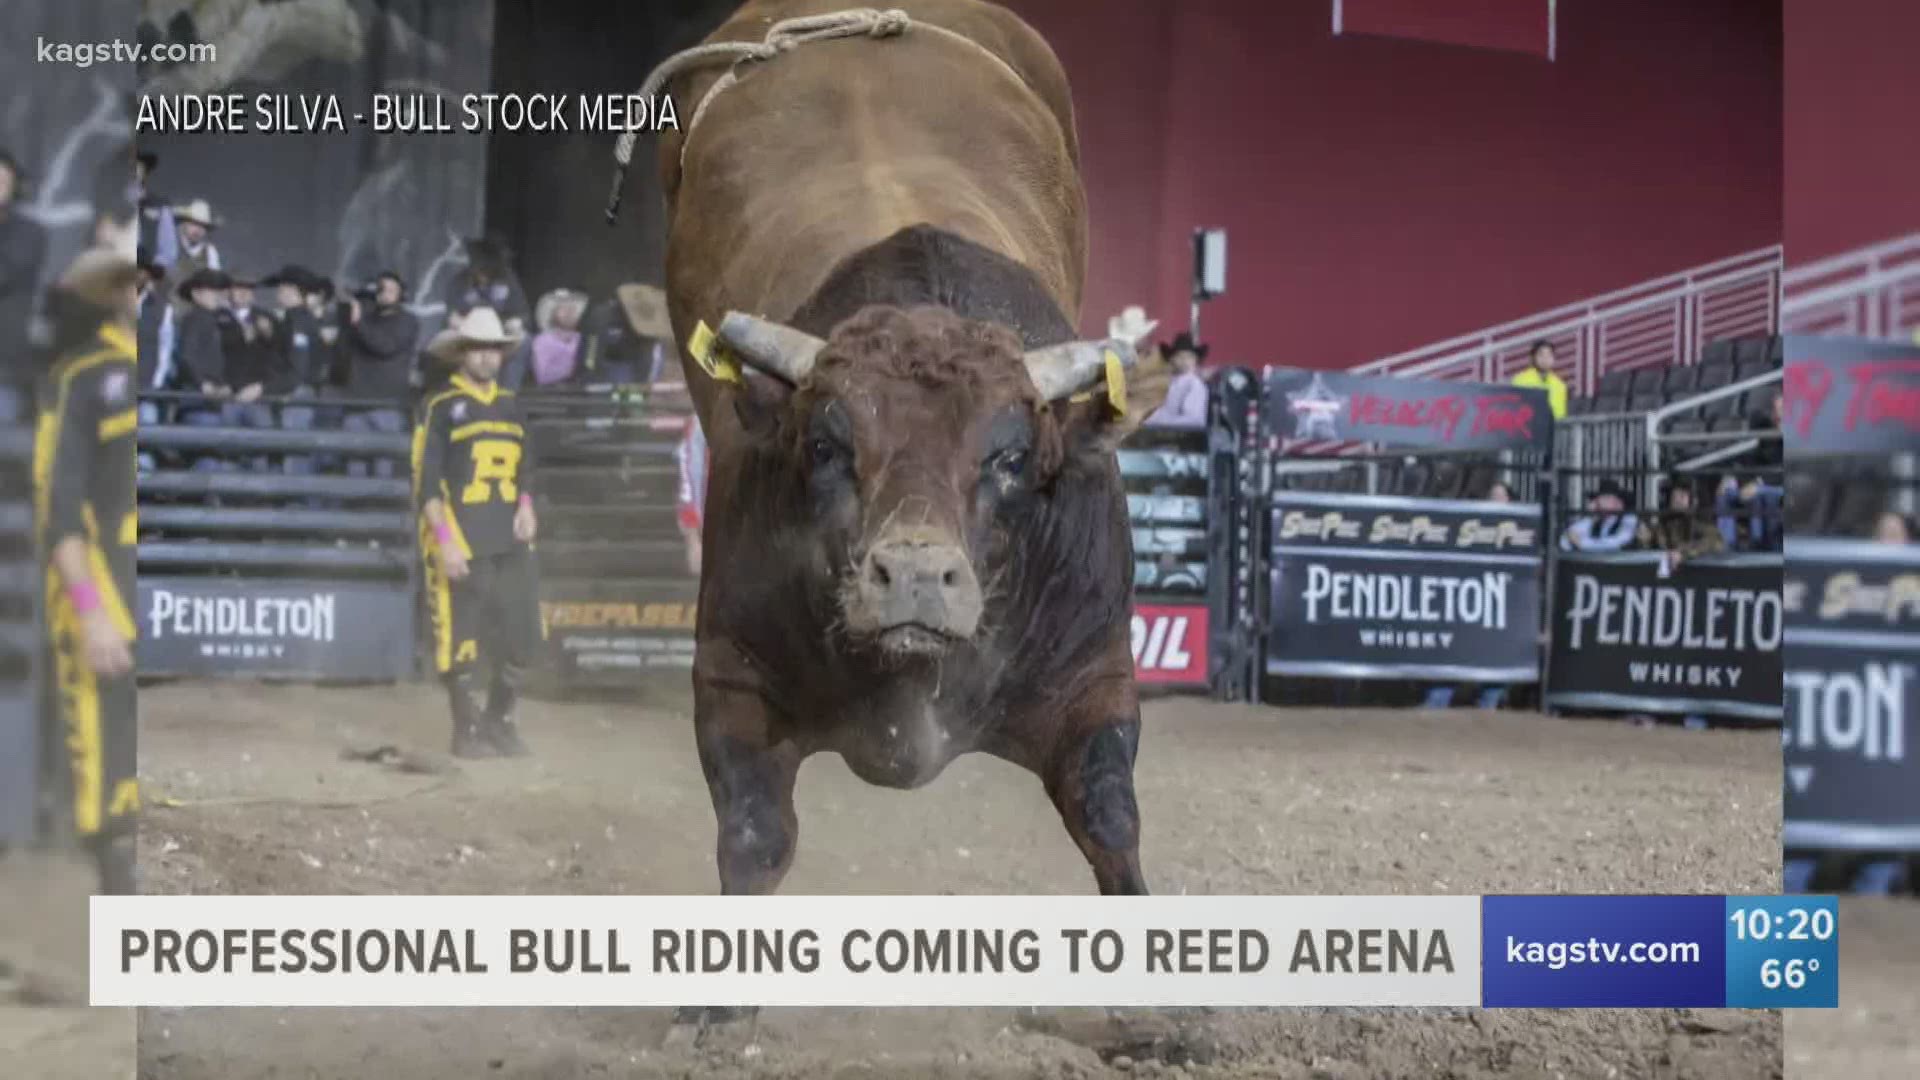 PBR, the world’s leading bull riding organization, will be bucking into Bryan-College Station for the first time in league history, April 9-10.